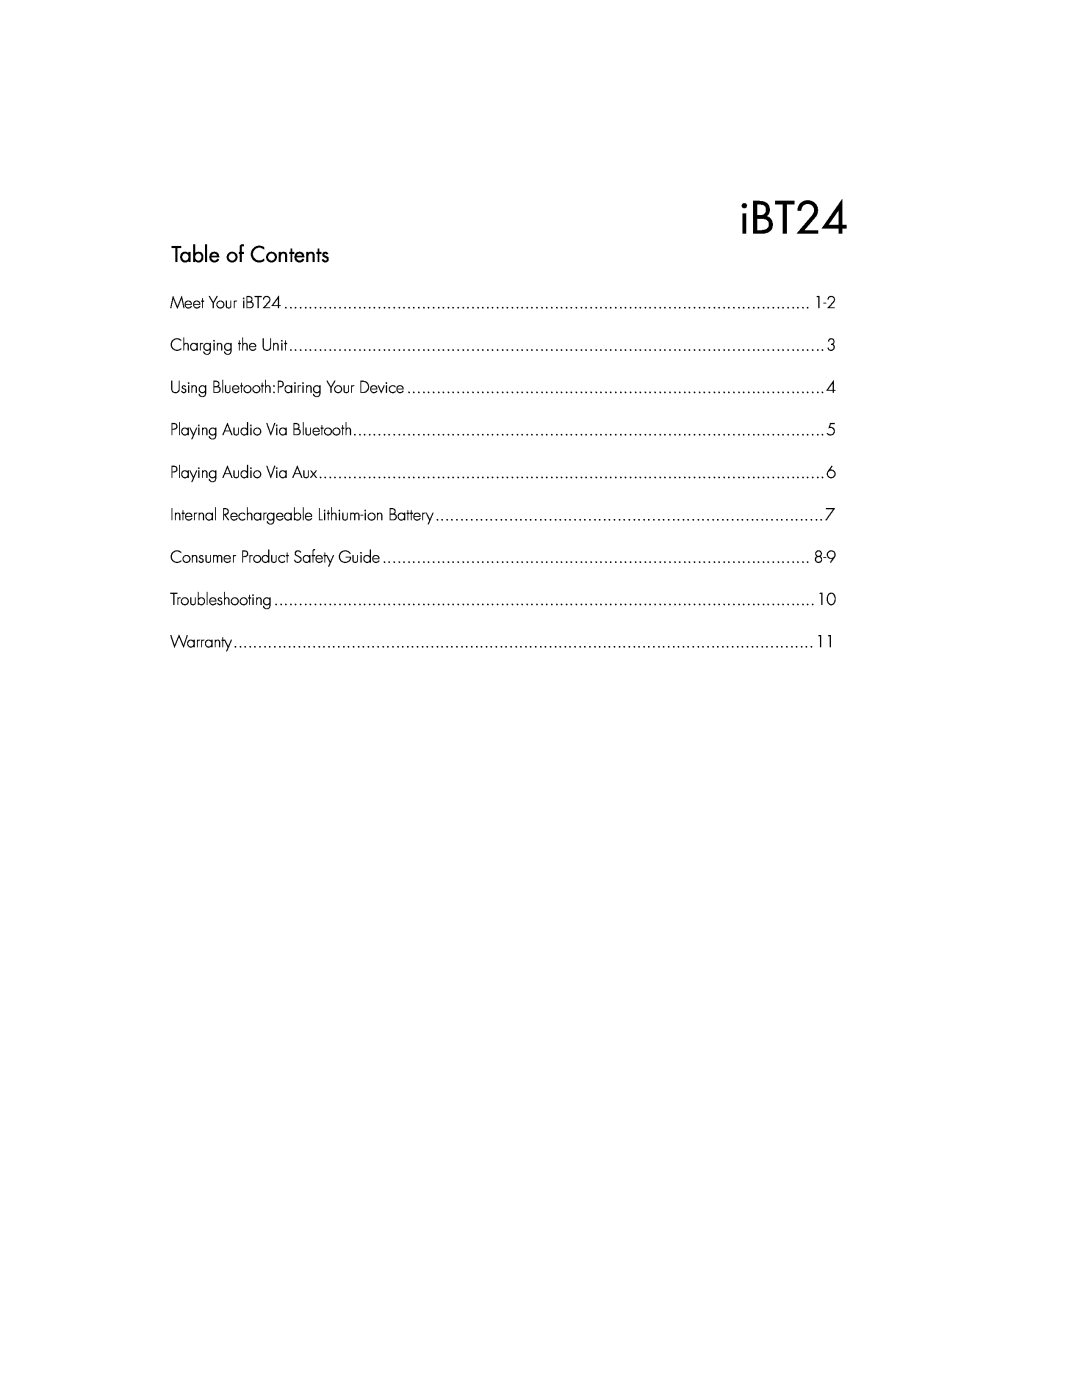 iHome IBT24GC, IBT24UC instruction manual Table of Contents, iBT24 